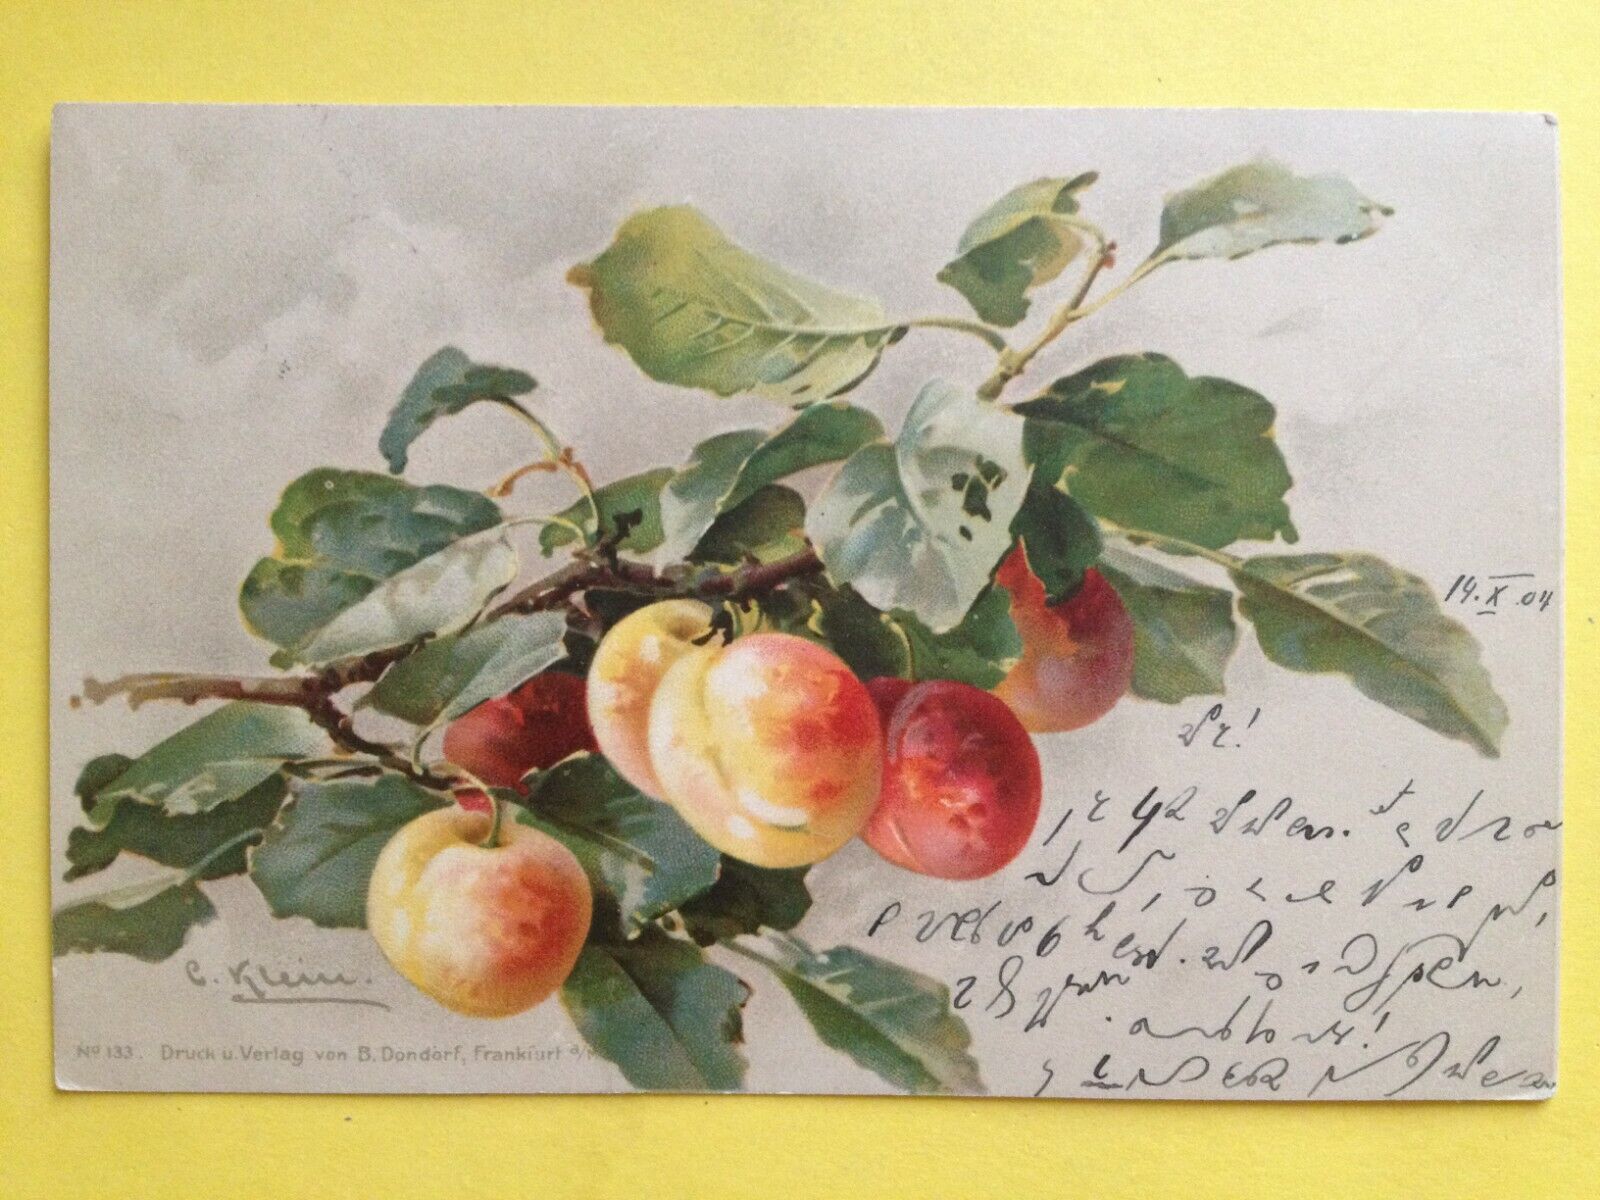 cpa illustration litho signed Catherine small fruit peaches pecher peache